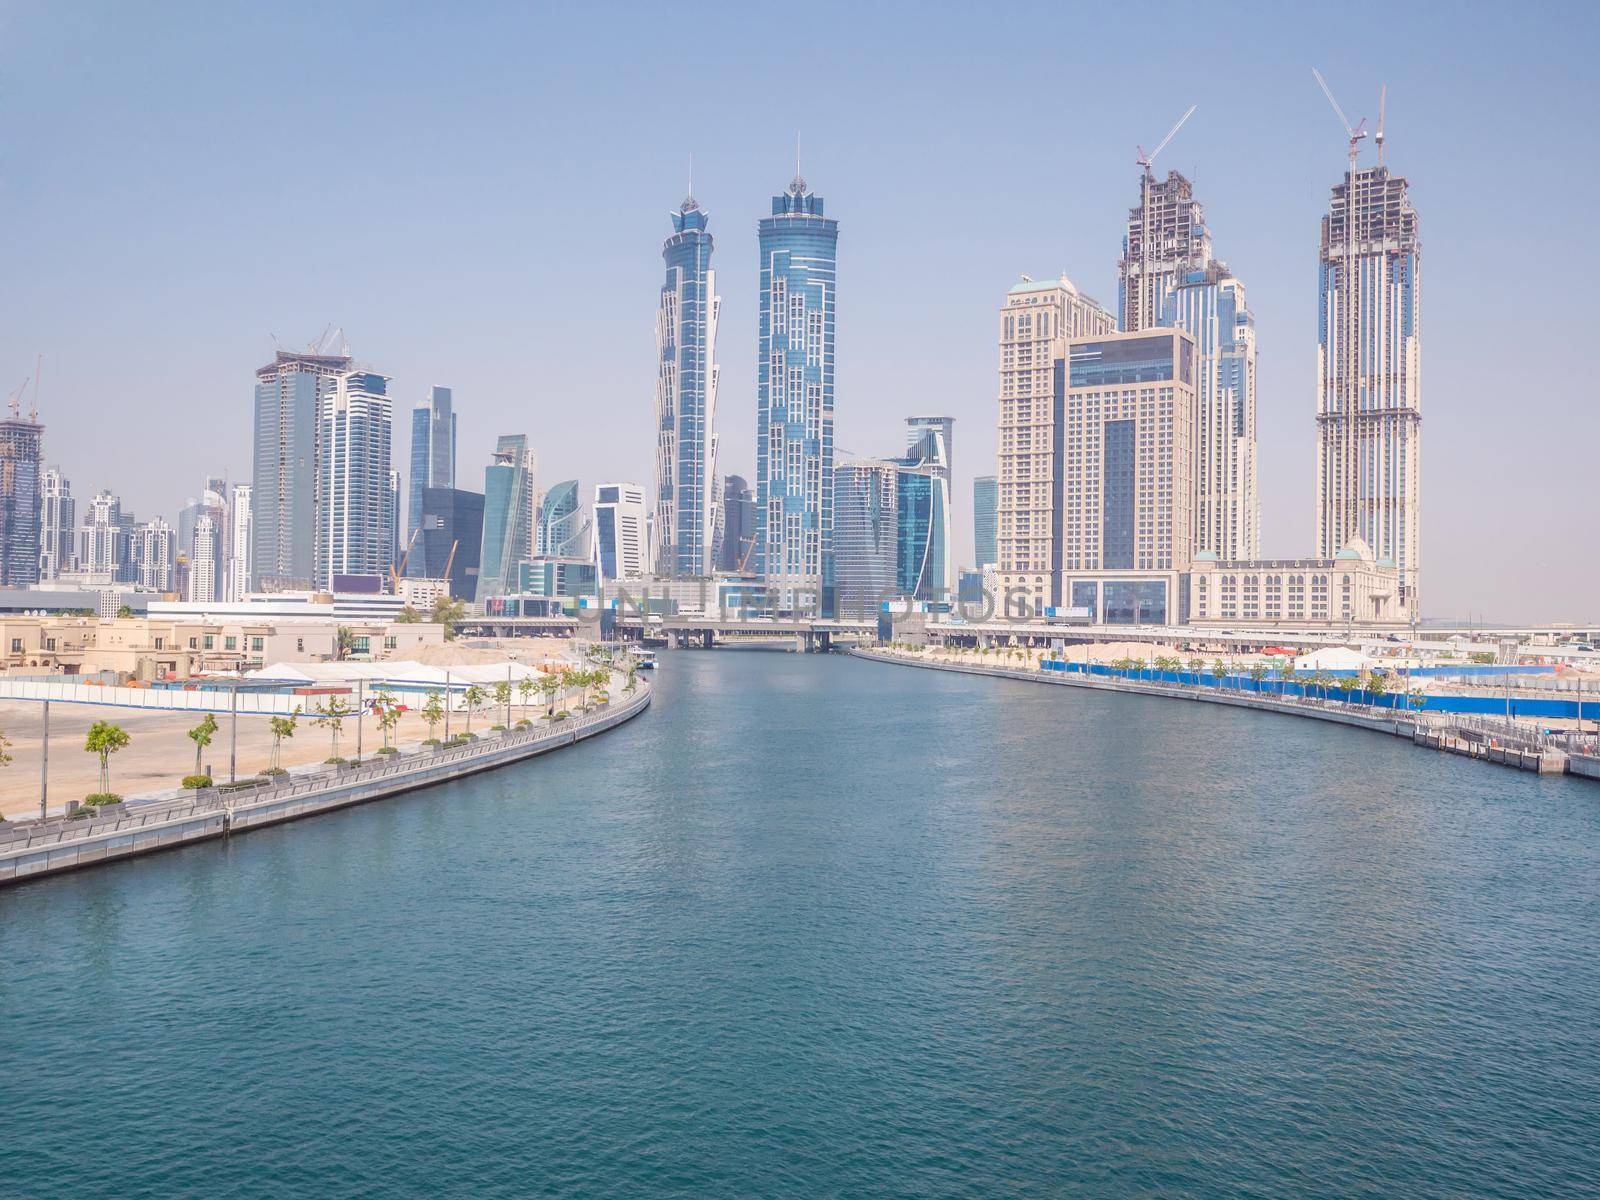 Panorama of the city of Dubai from the bridge of the river channel Dubai Creek.